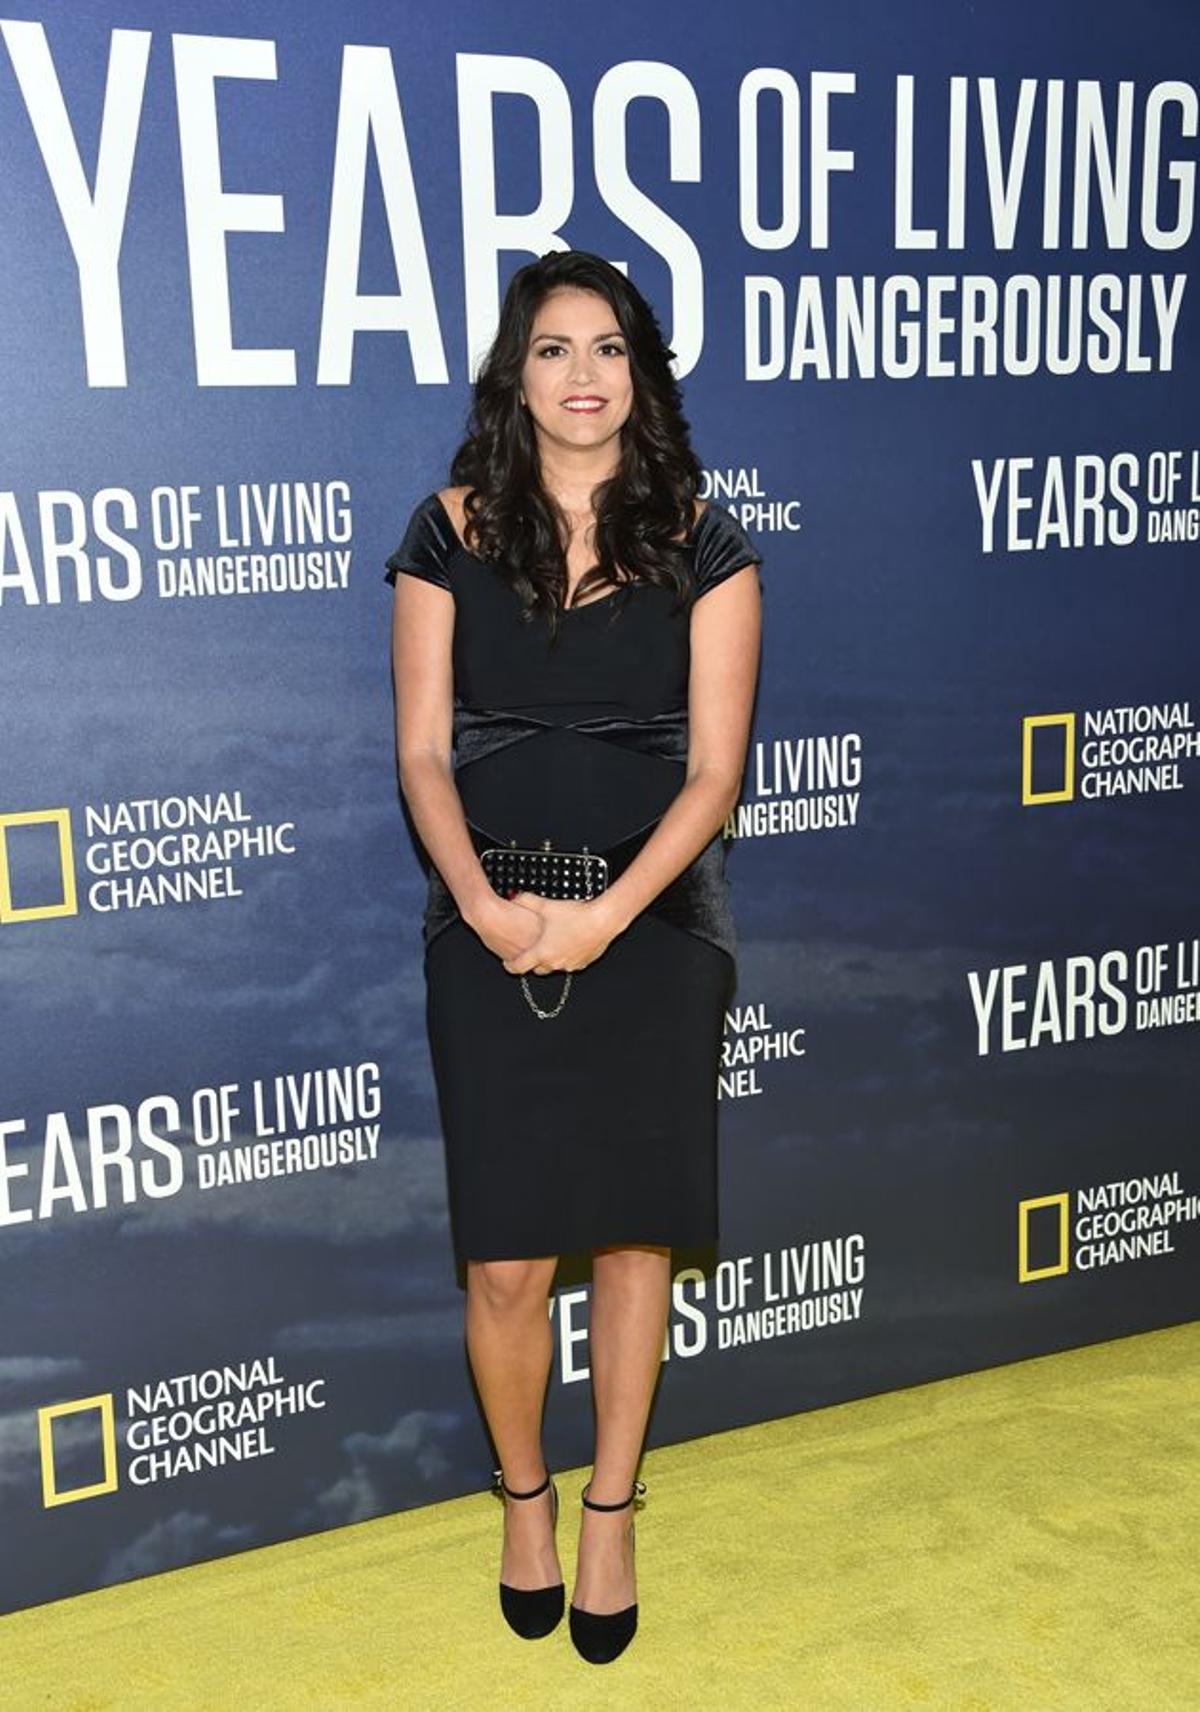 Estreno 'Years of Living Dangerously': Cecily Strong